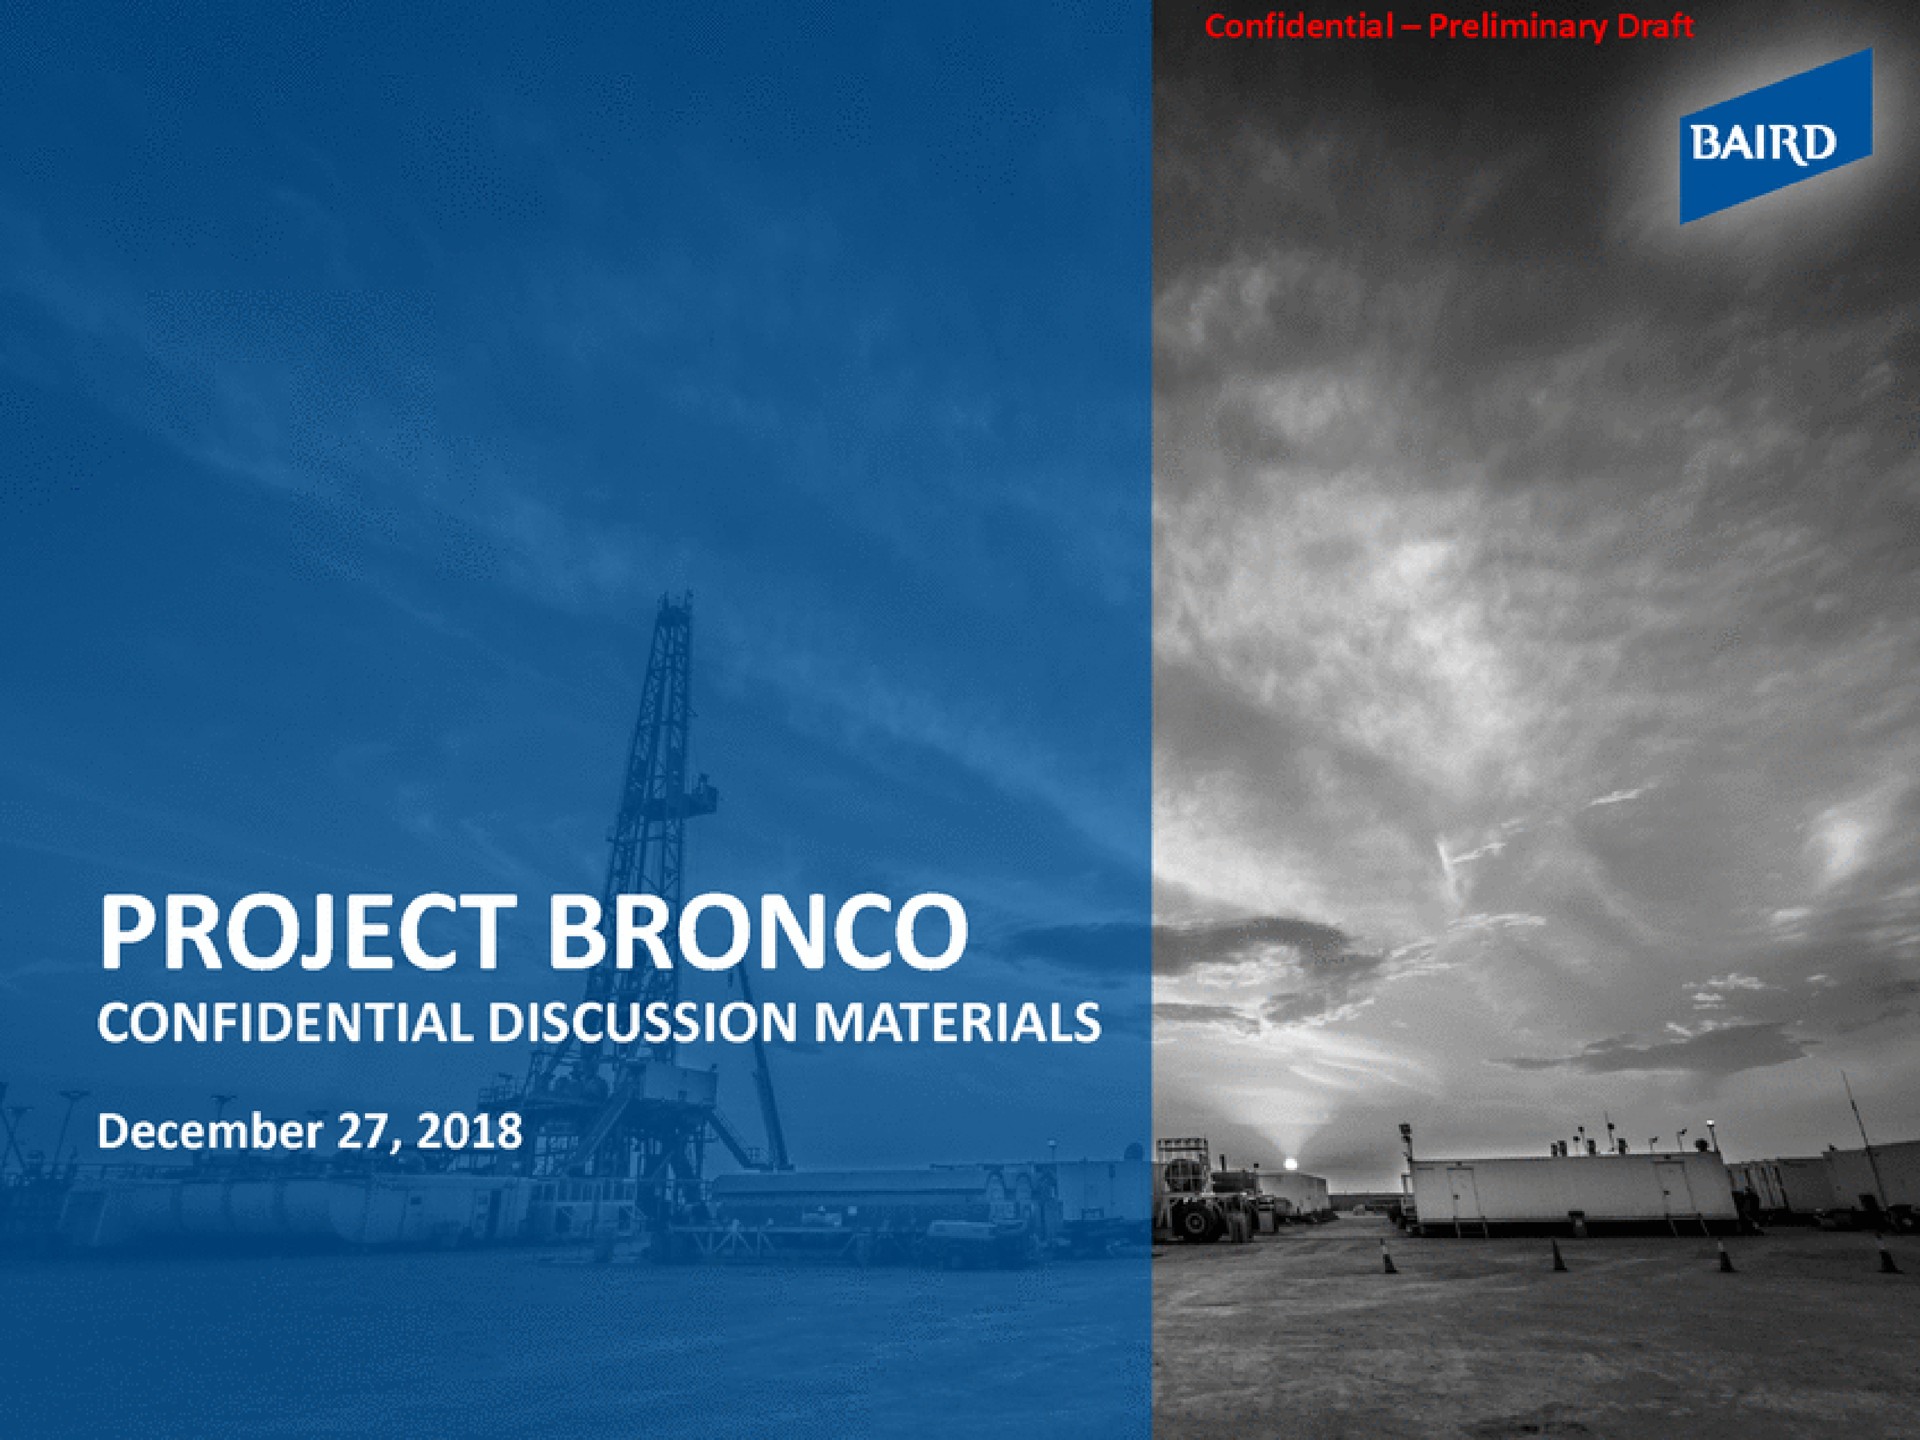 project bronco confidential discussion materials | Baird